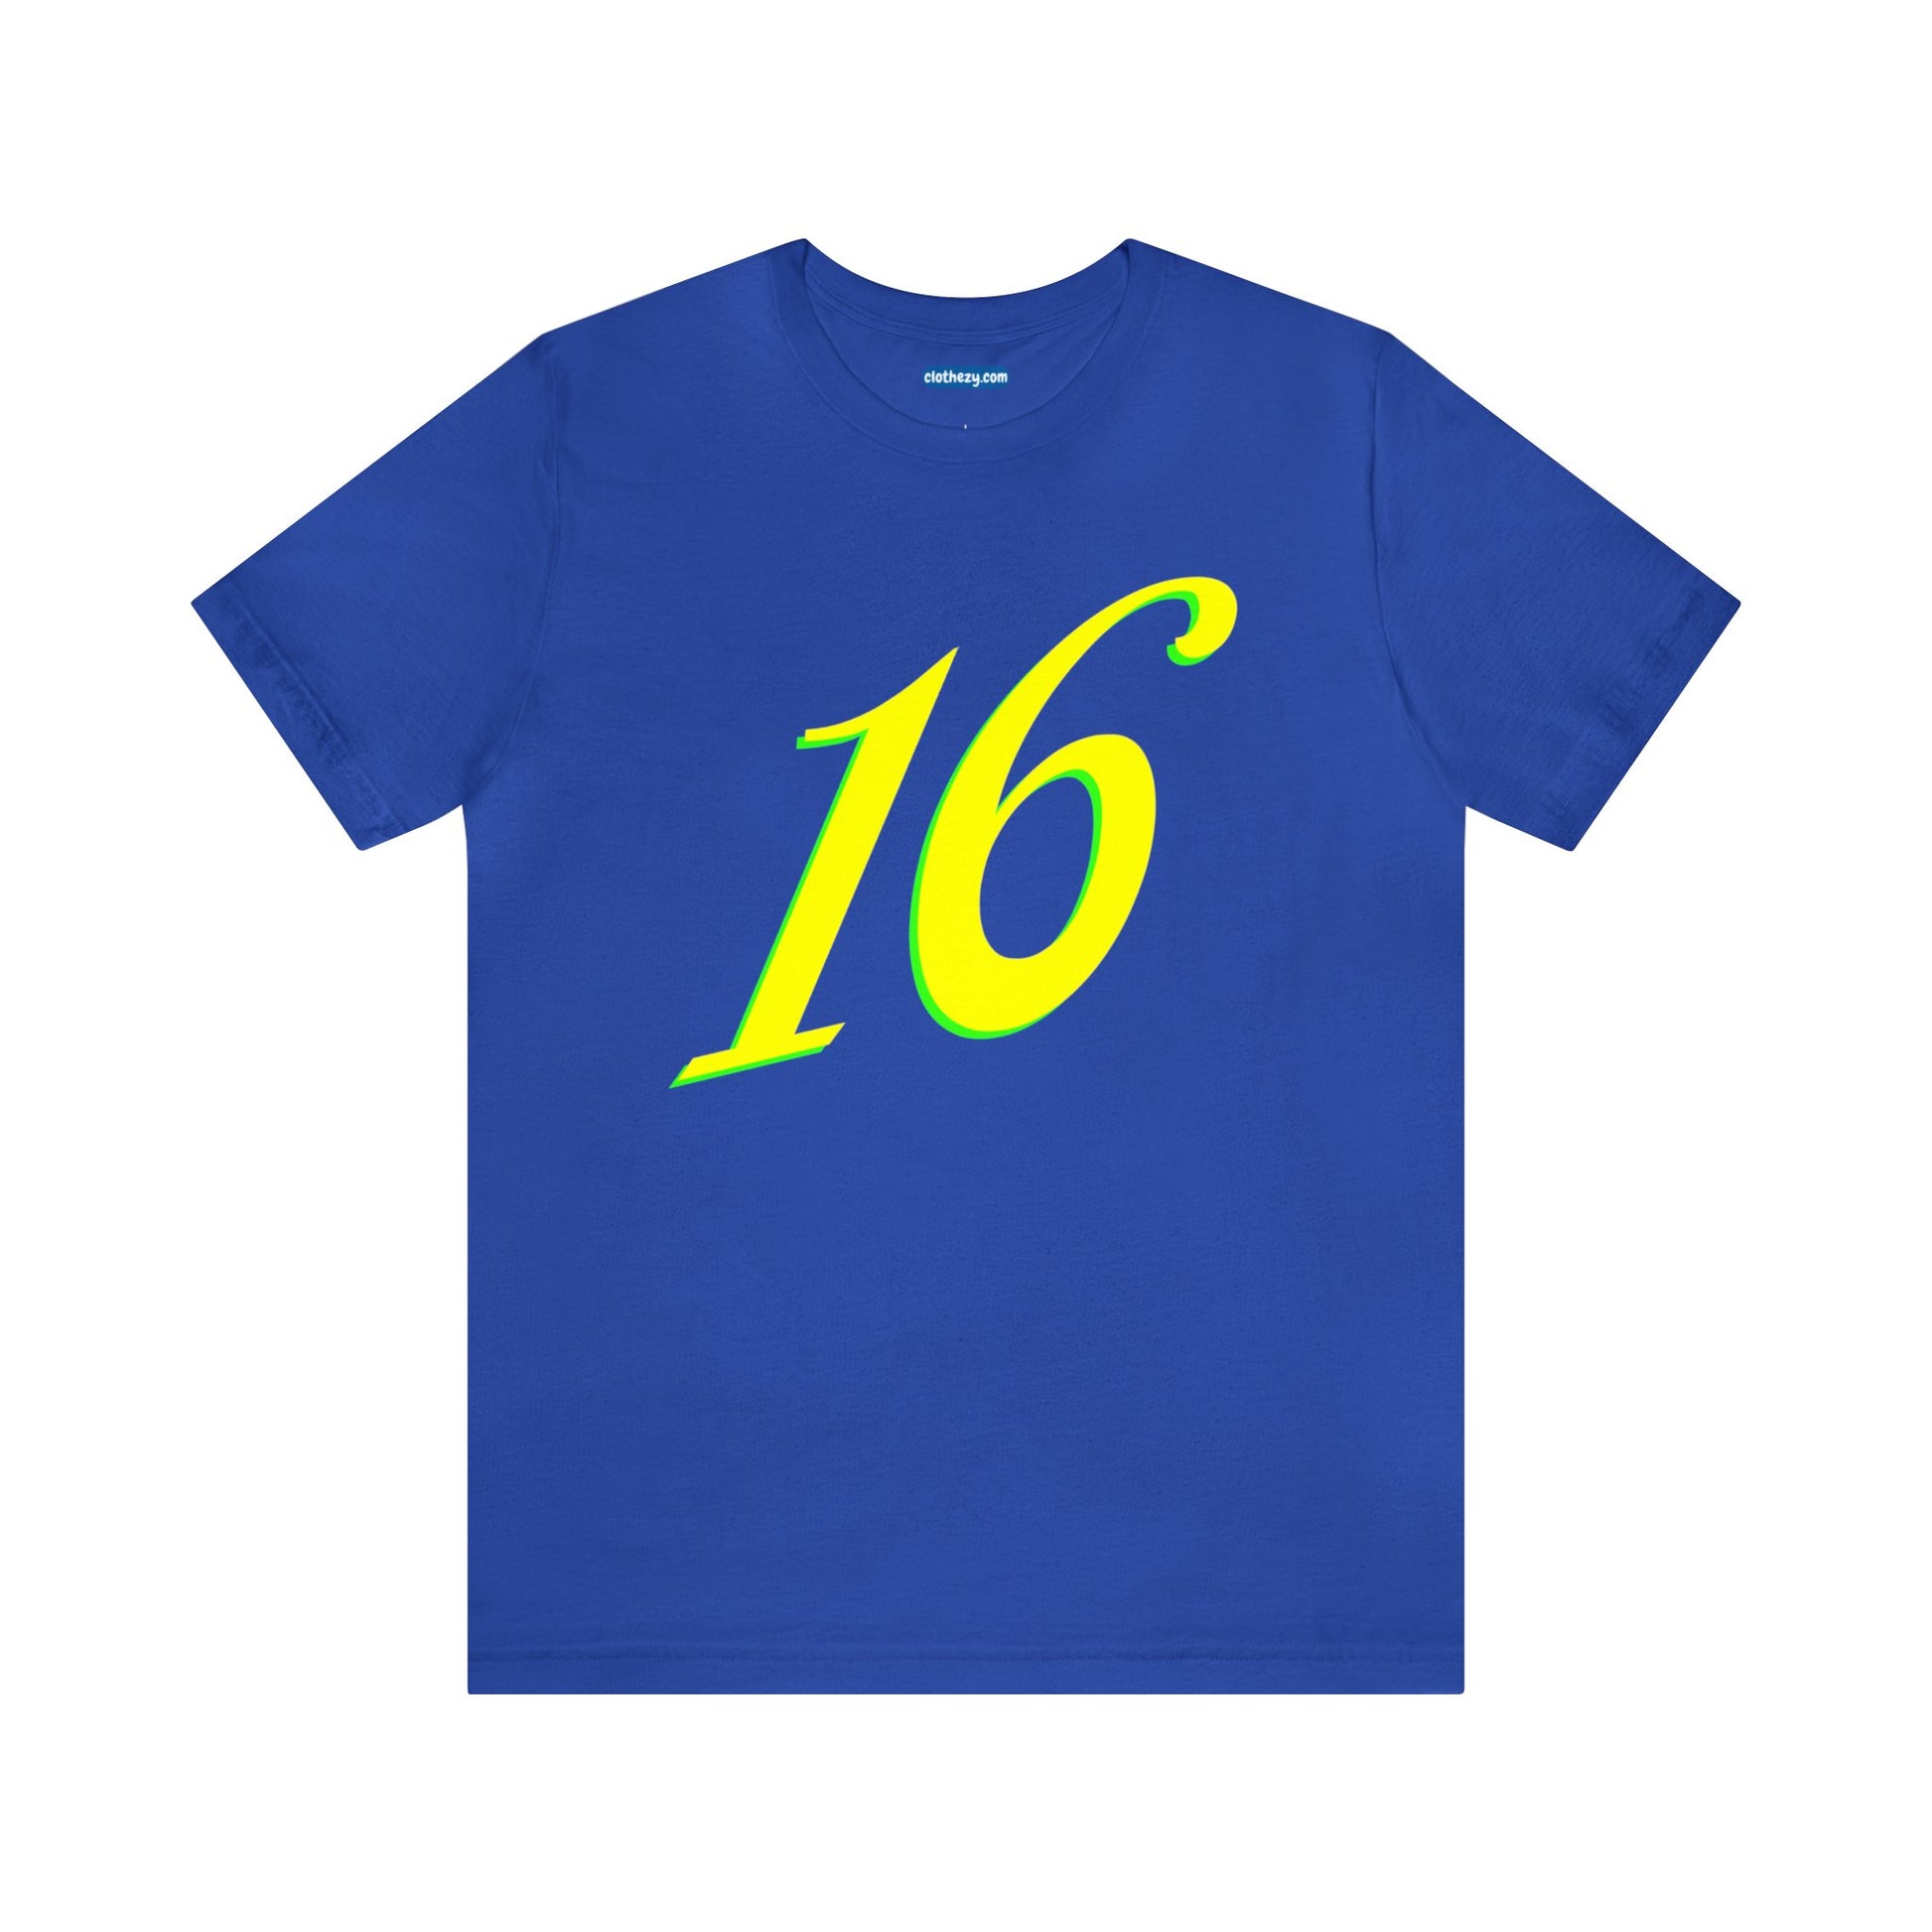 Number 16 Design - Soft Cotton Tee for birthdays and celebrations, Gift for friends and family, Multiple Options by clothezy.com in Royal Blue Size Small - Buy Now